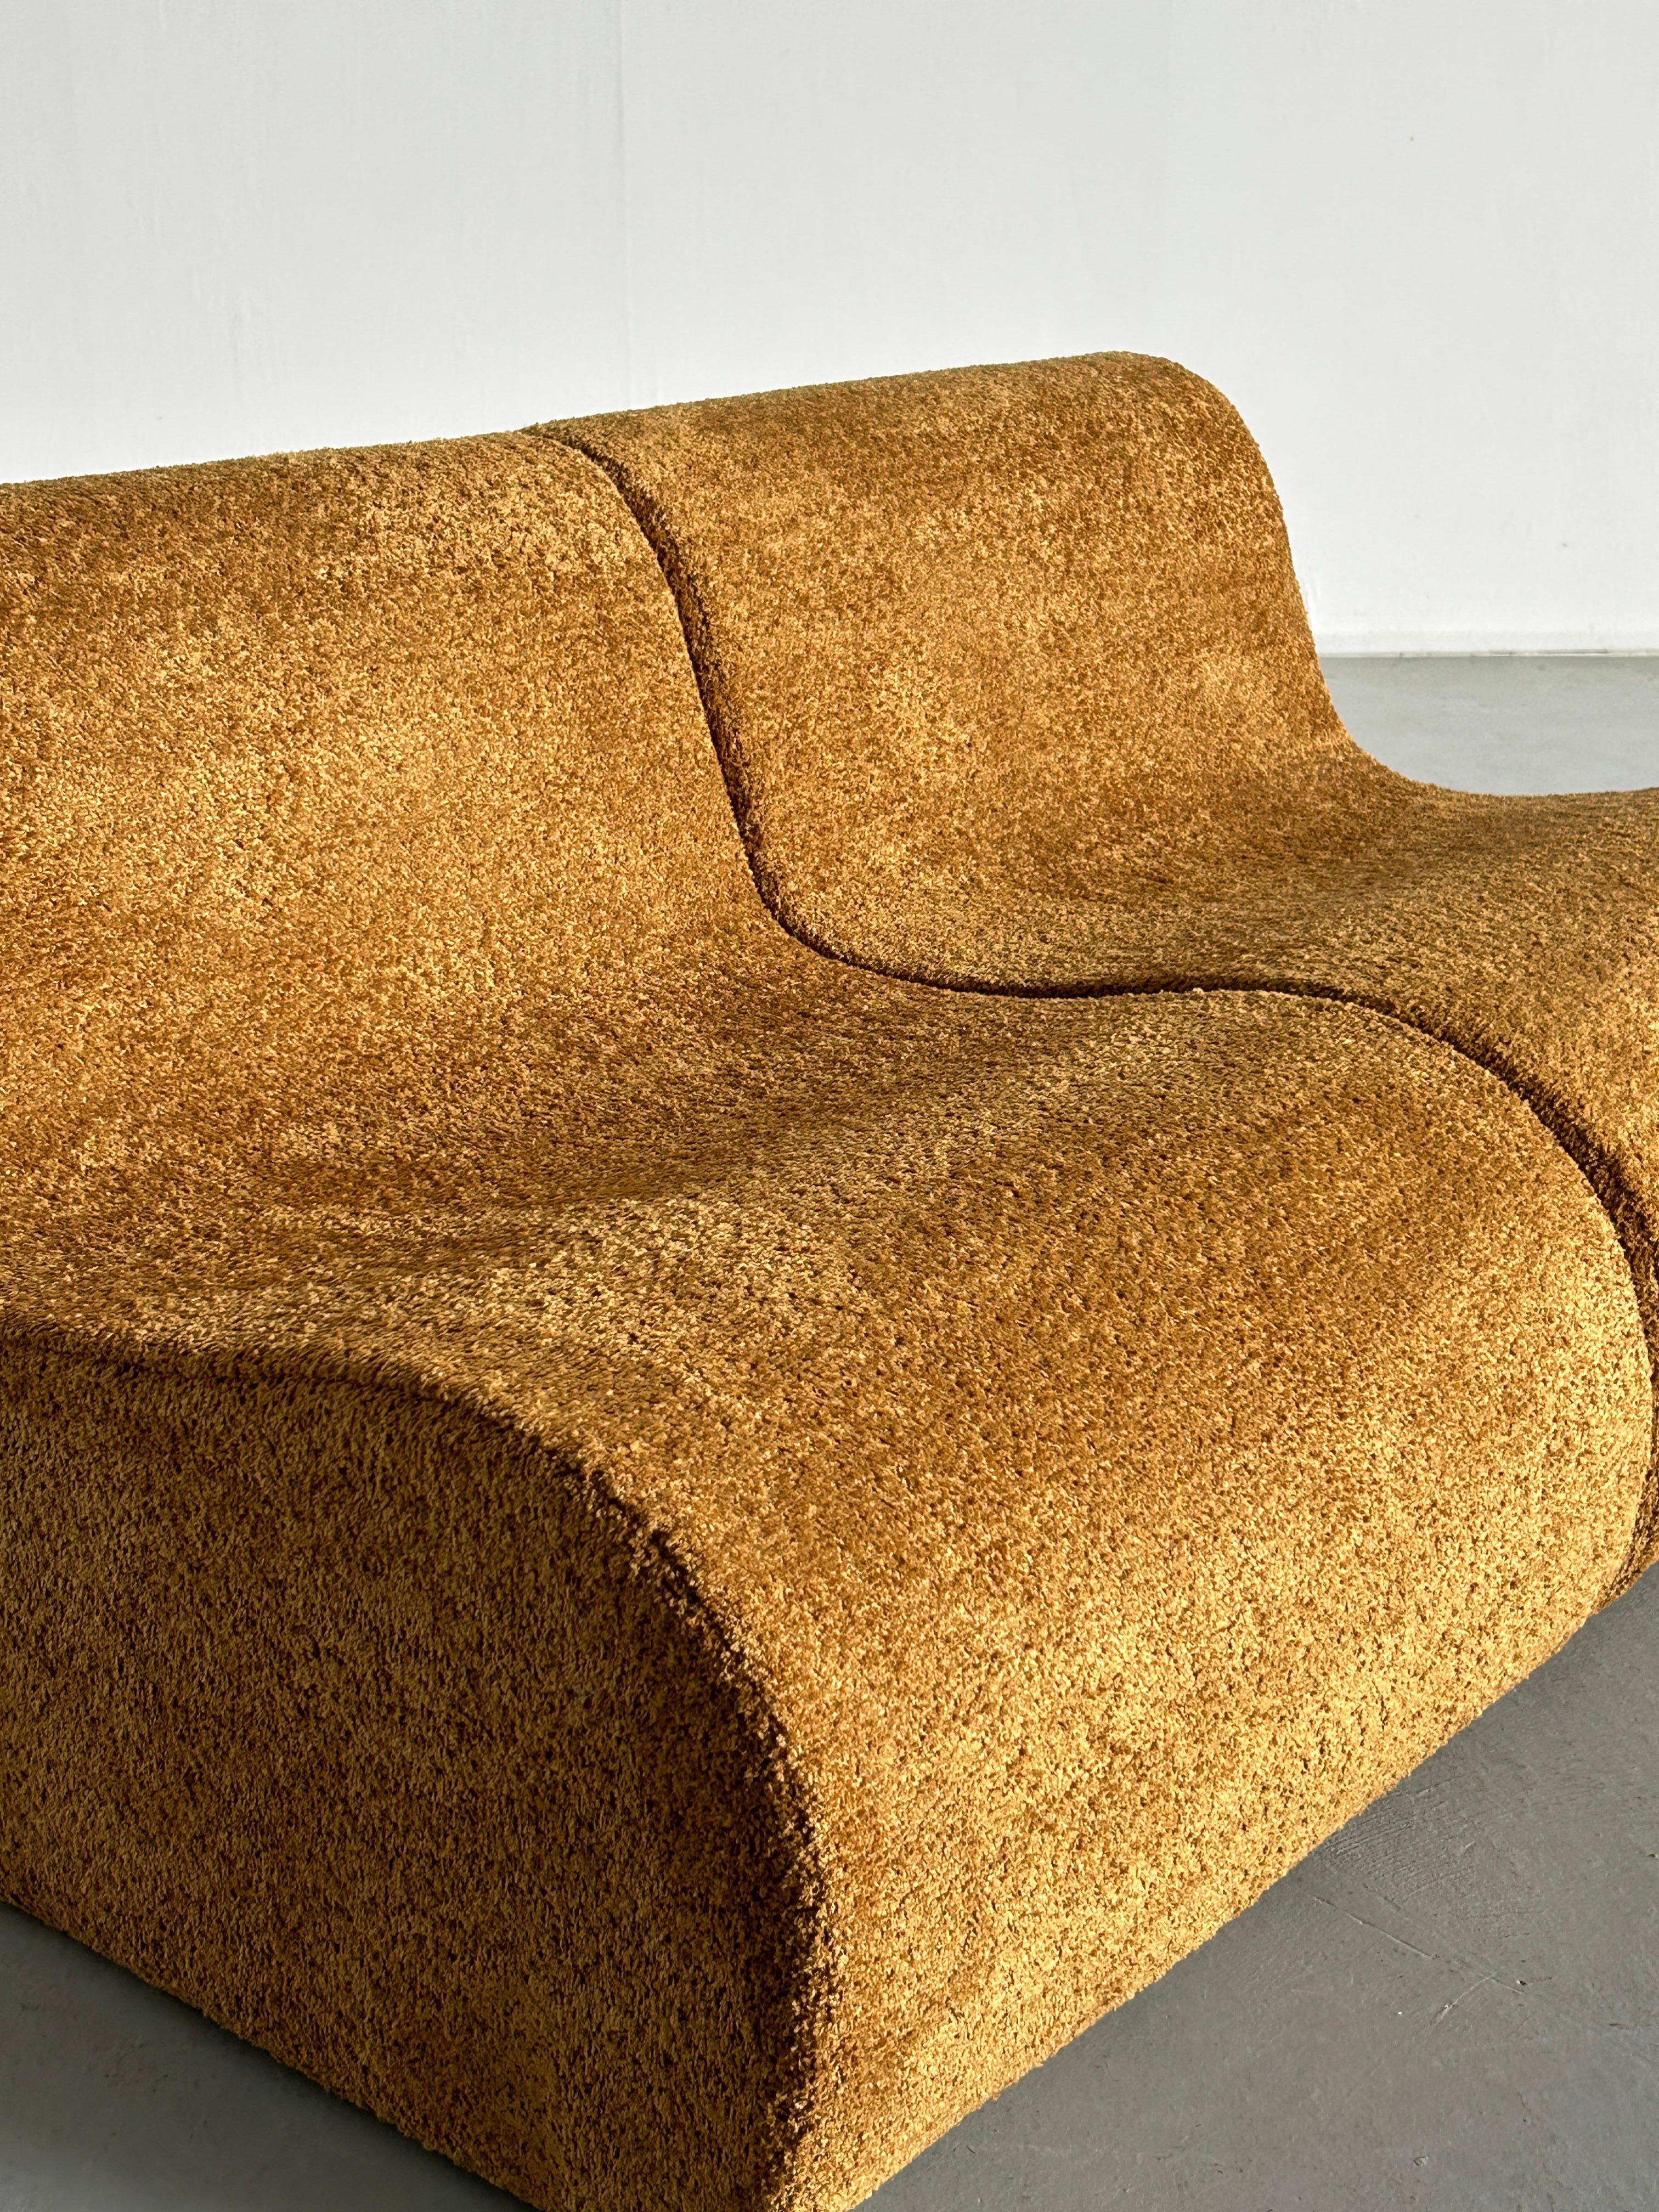 Pair of Italian Mid-Century-Modern Lounge Chairs in Ochre Boucle, 1970s Italy For Sale 3